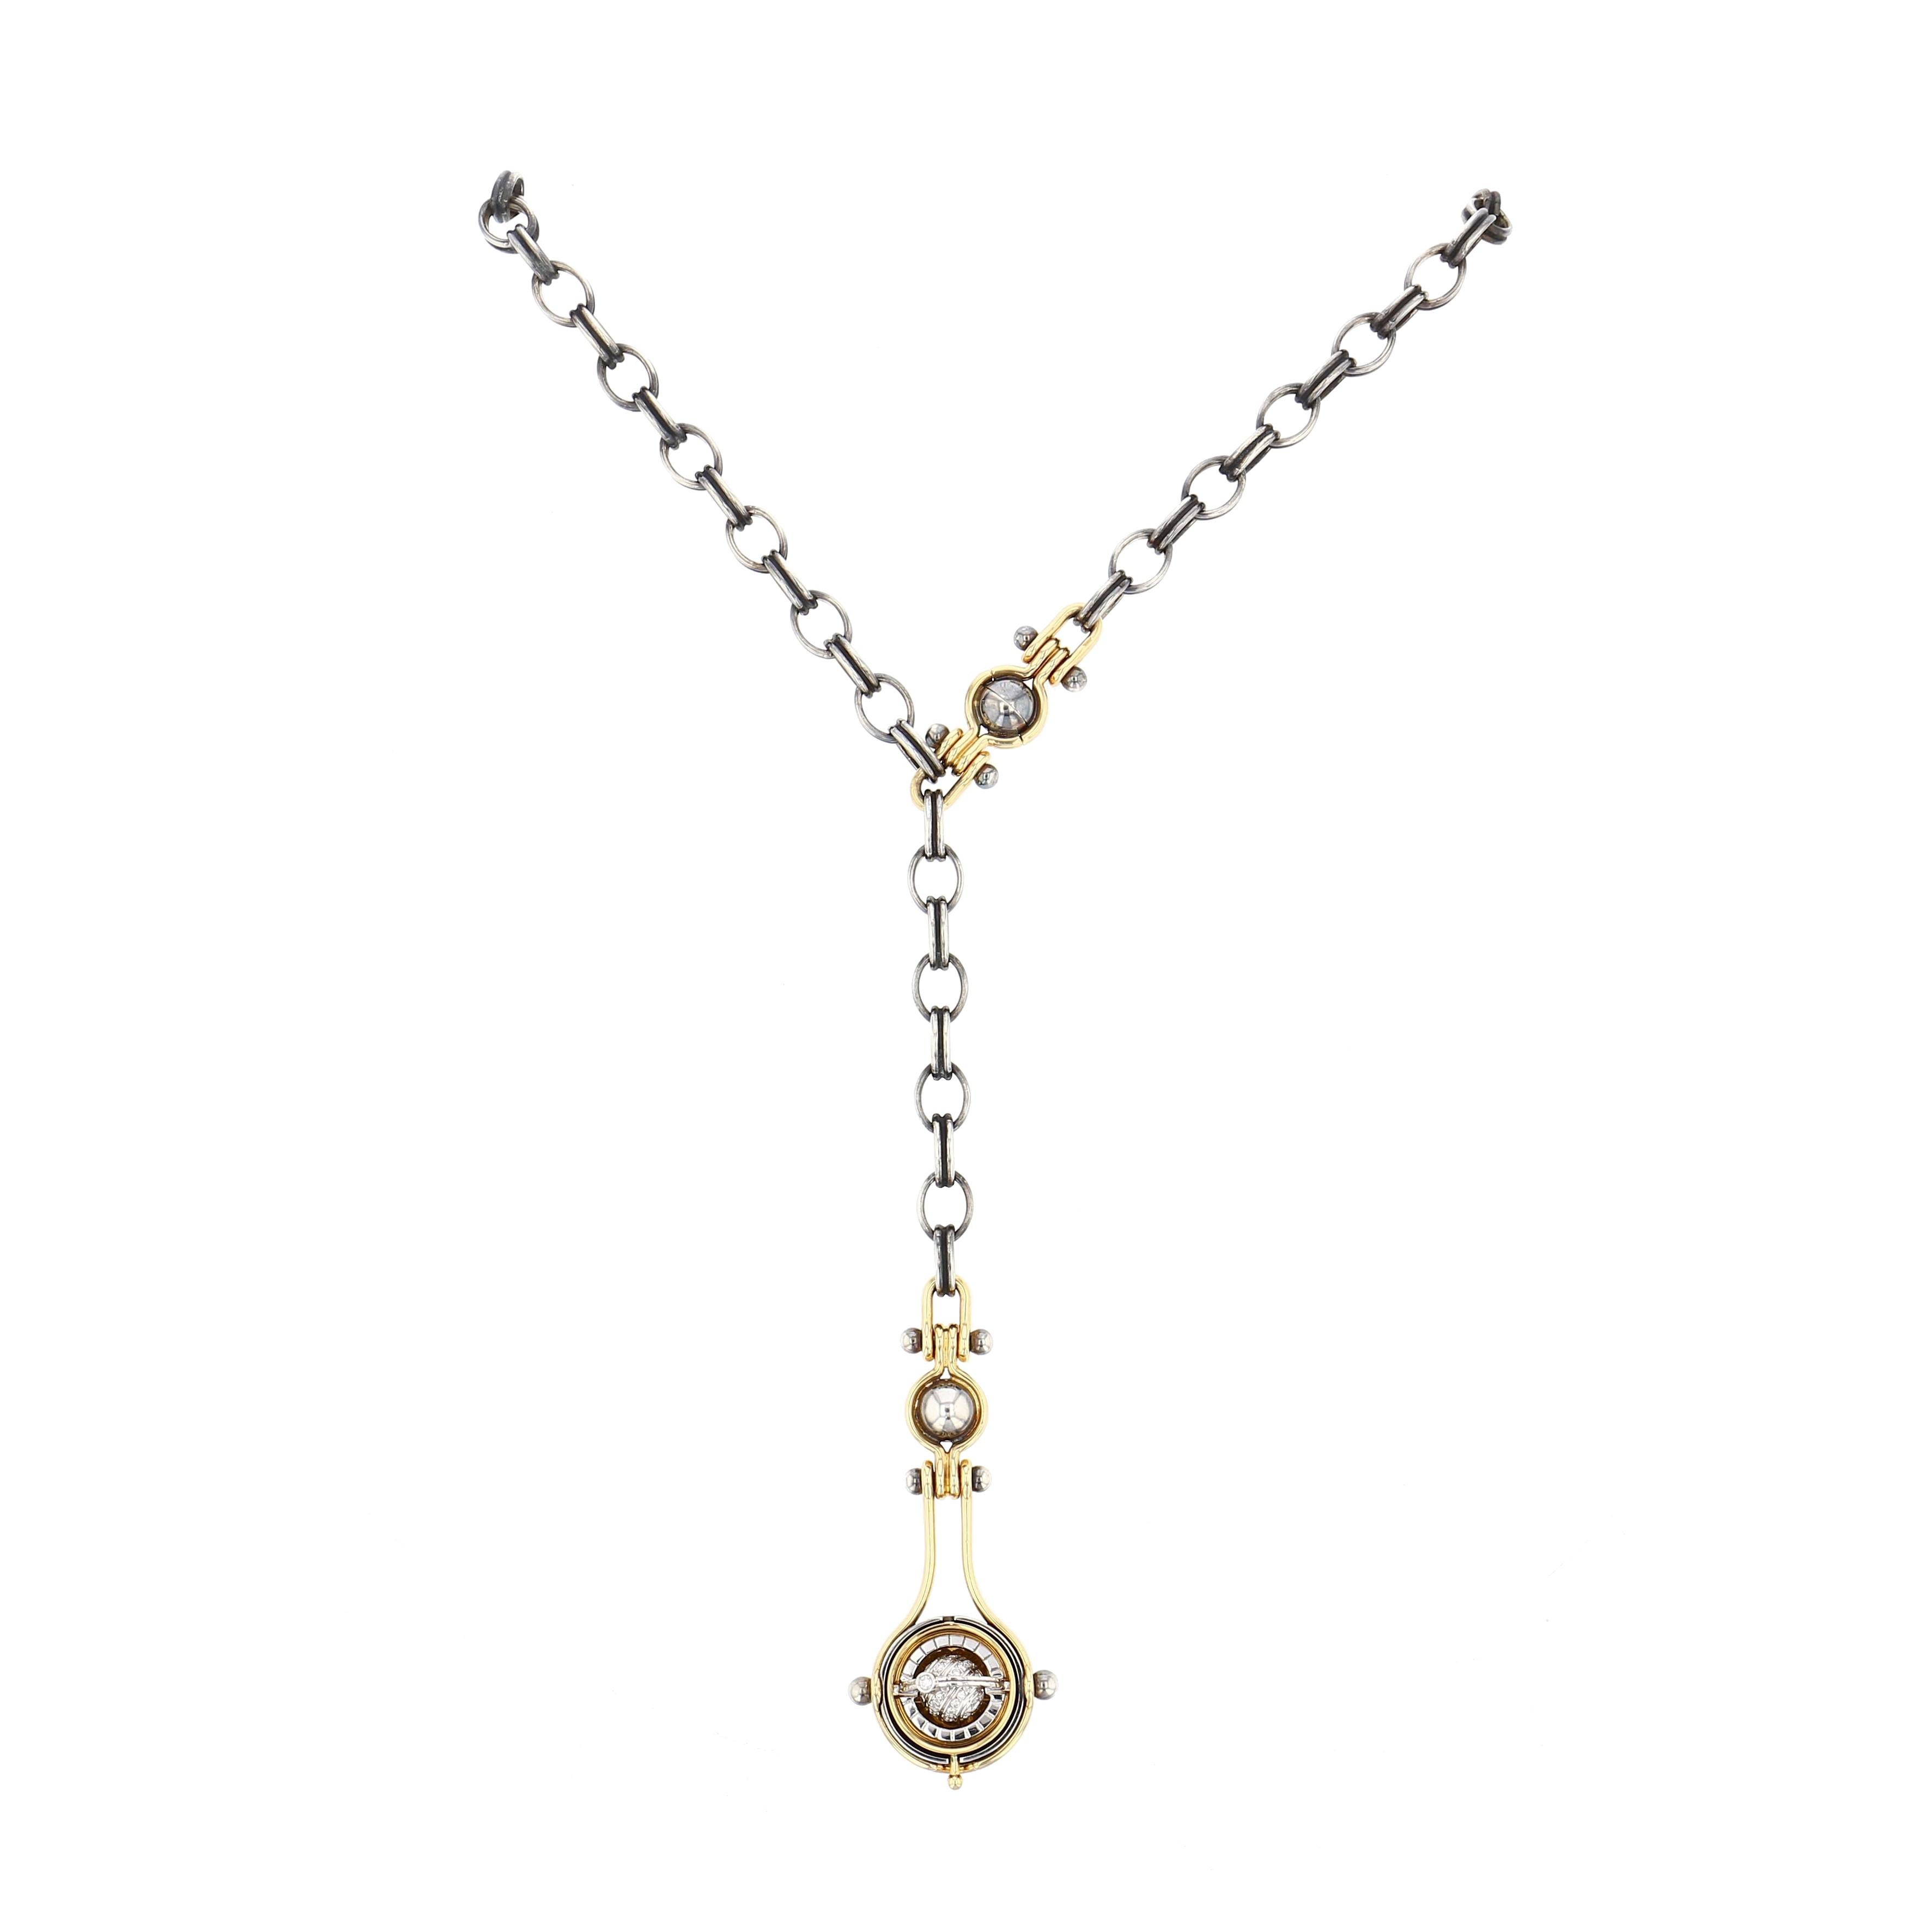 Cushion Cut Diamonds Drops Necklace in 18k yellow gold by Elie Top